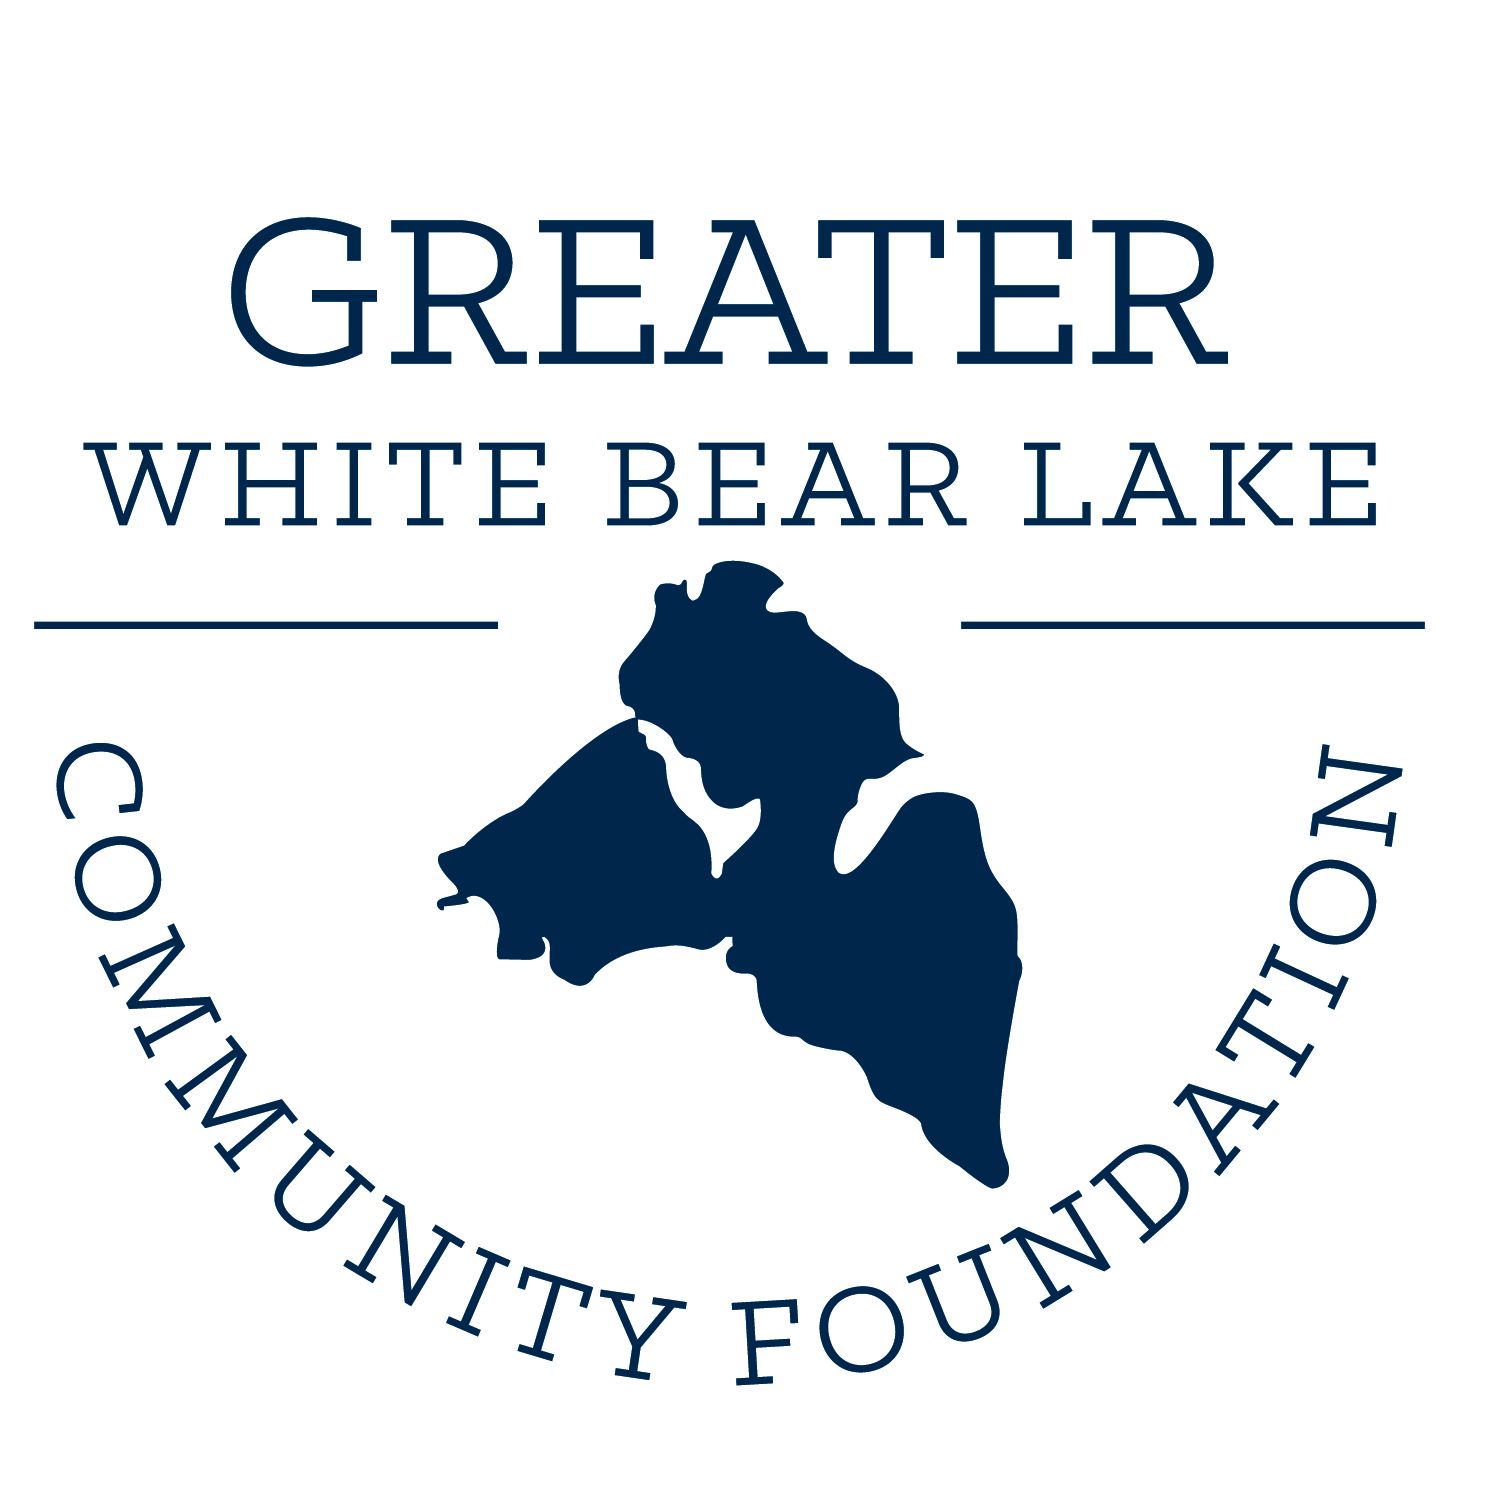 The logo for the greater white bear lake community foundation